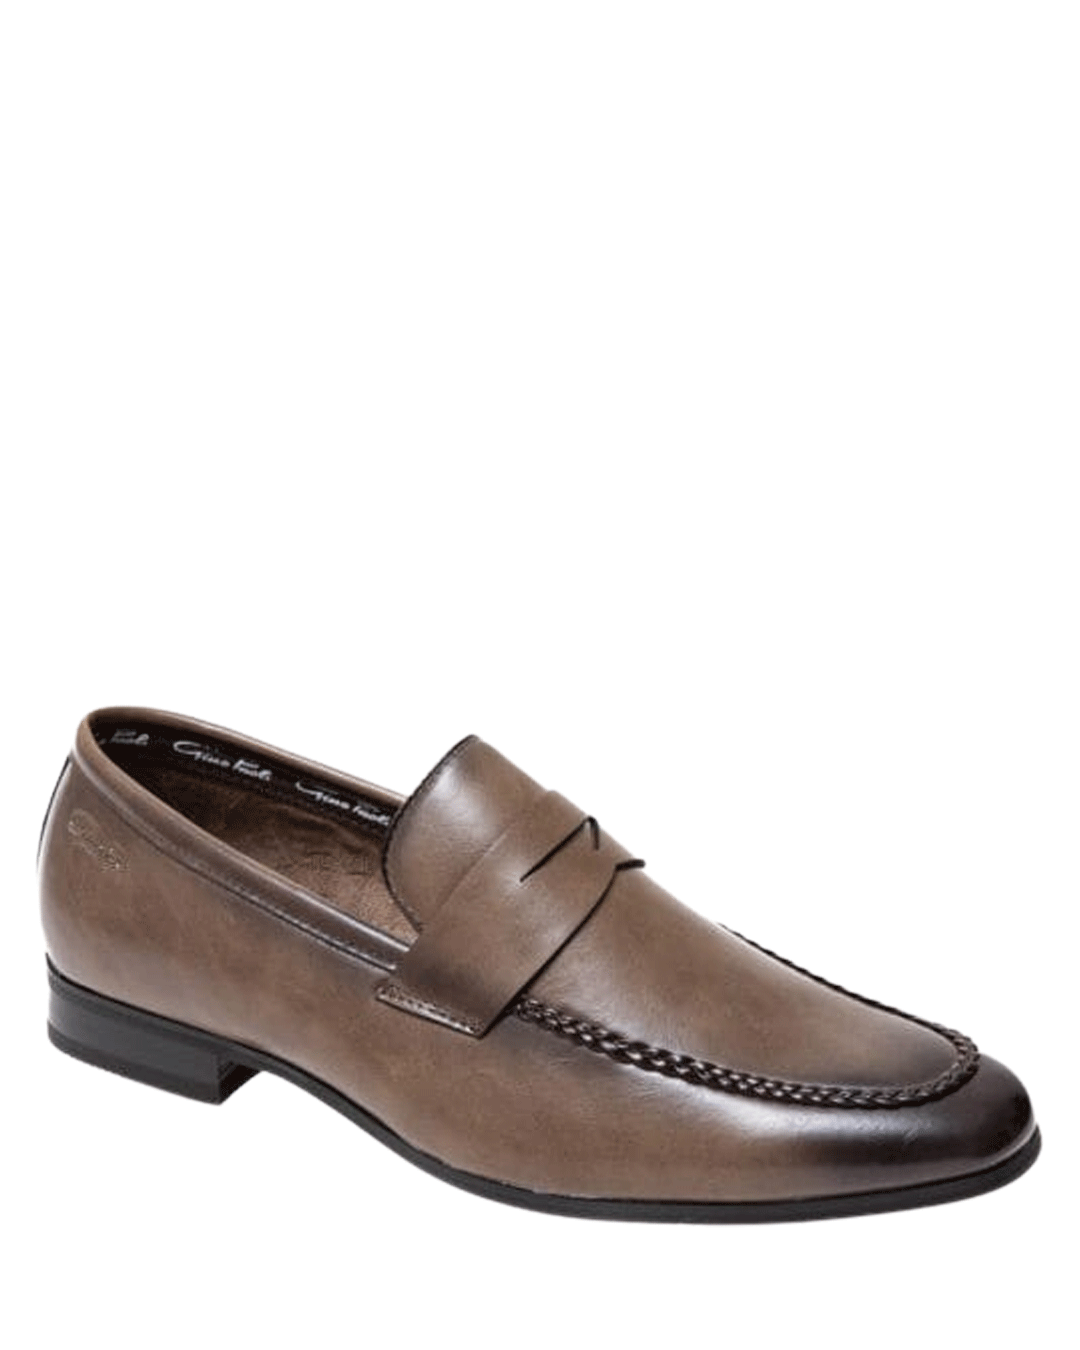 GINO PAOLI Taupe Penny Loafer